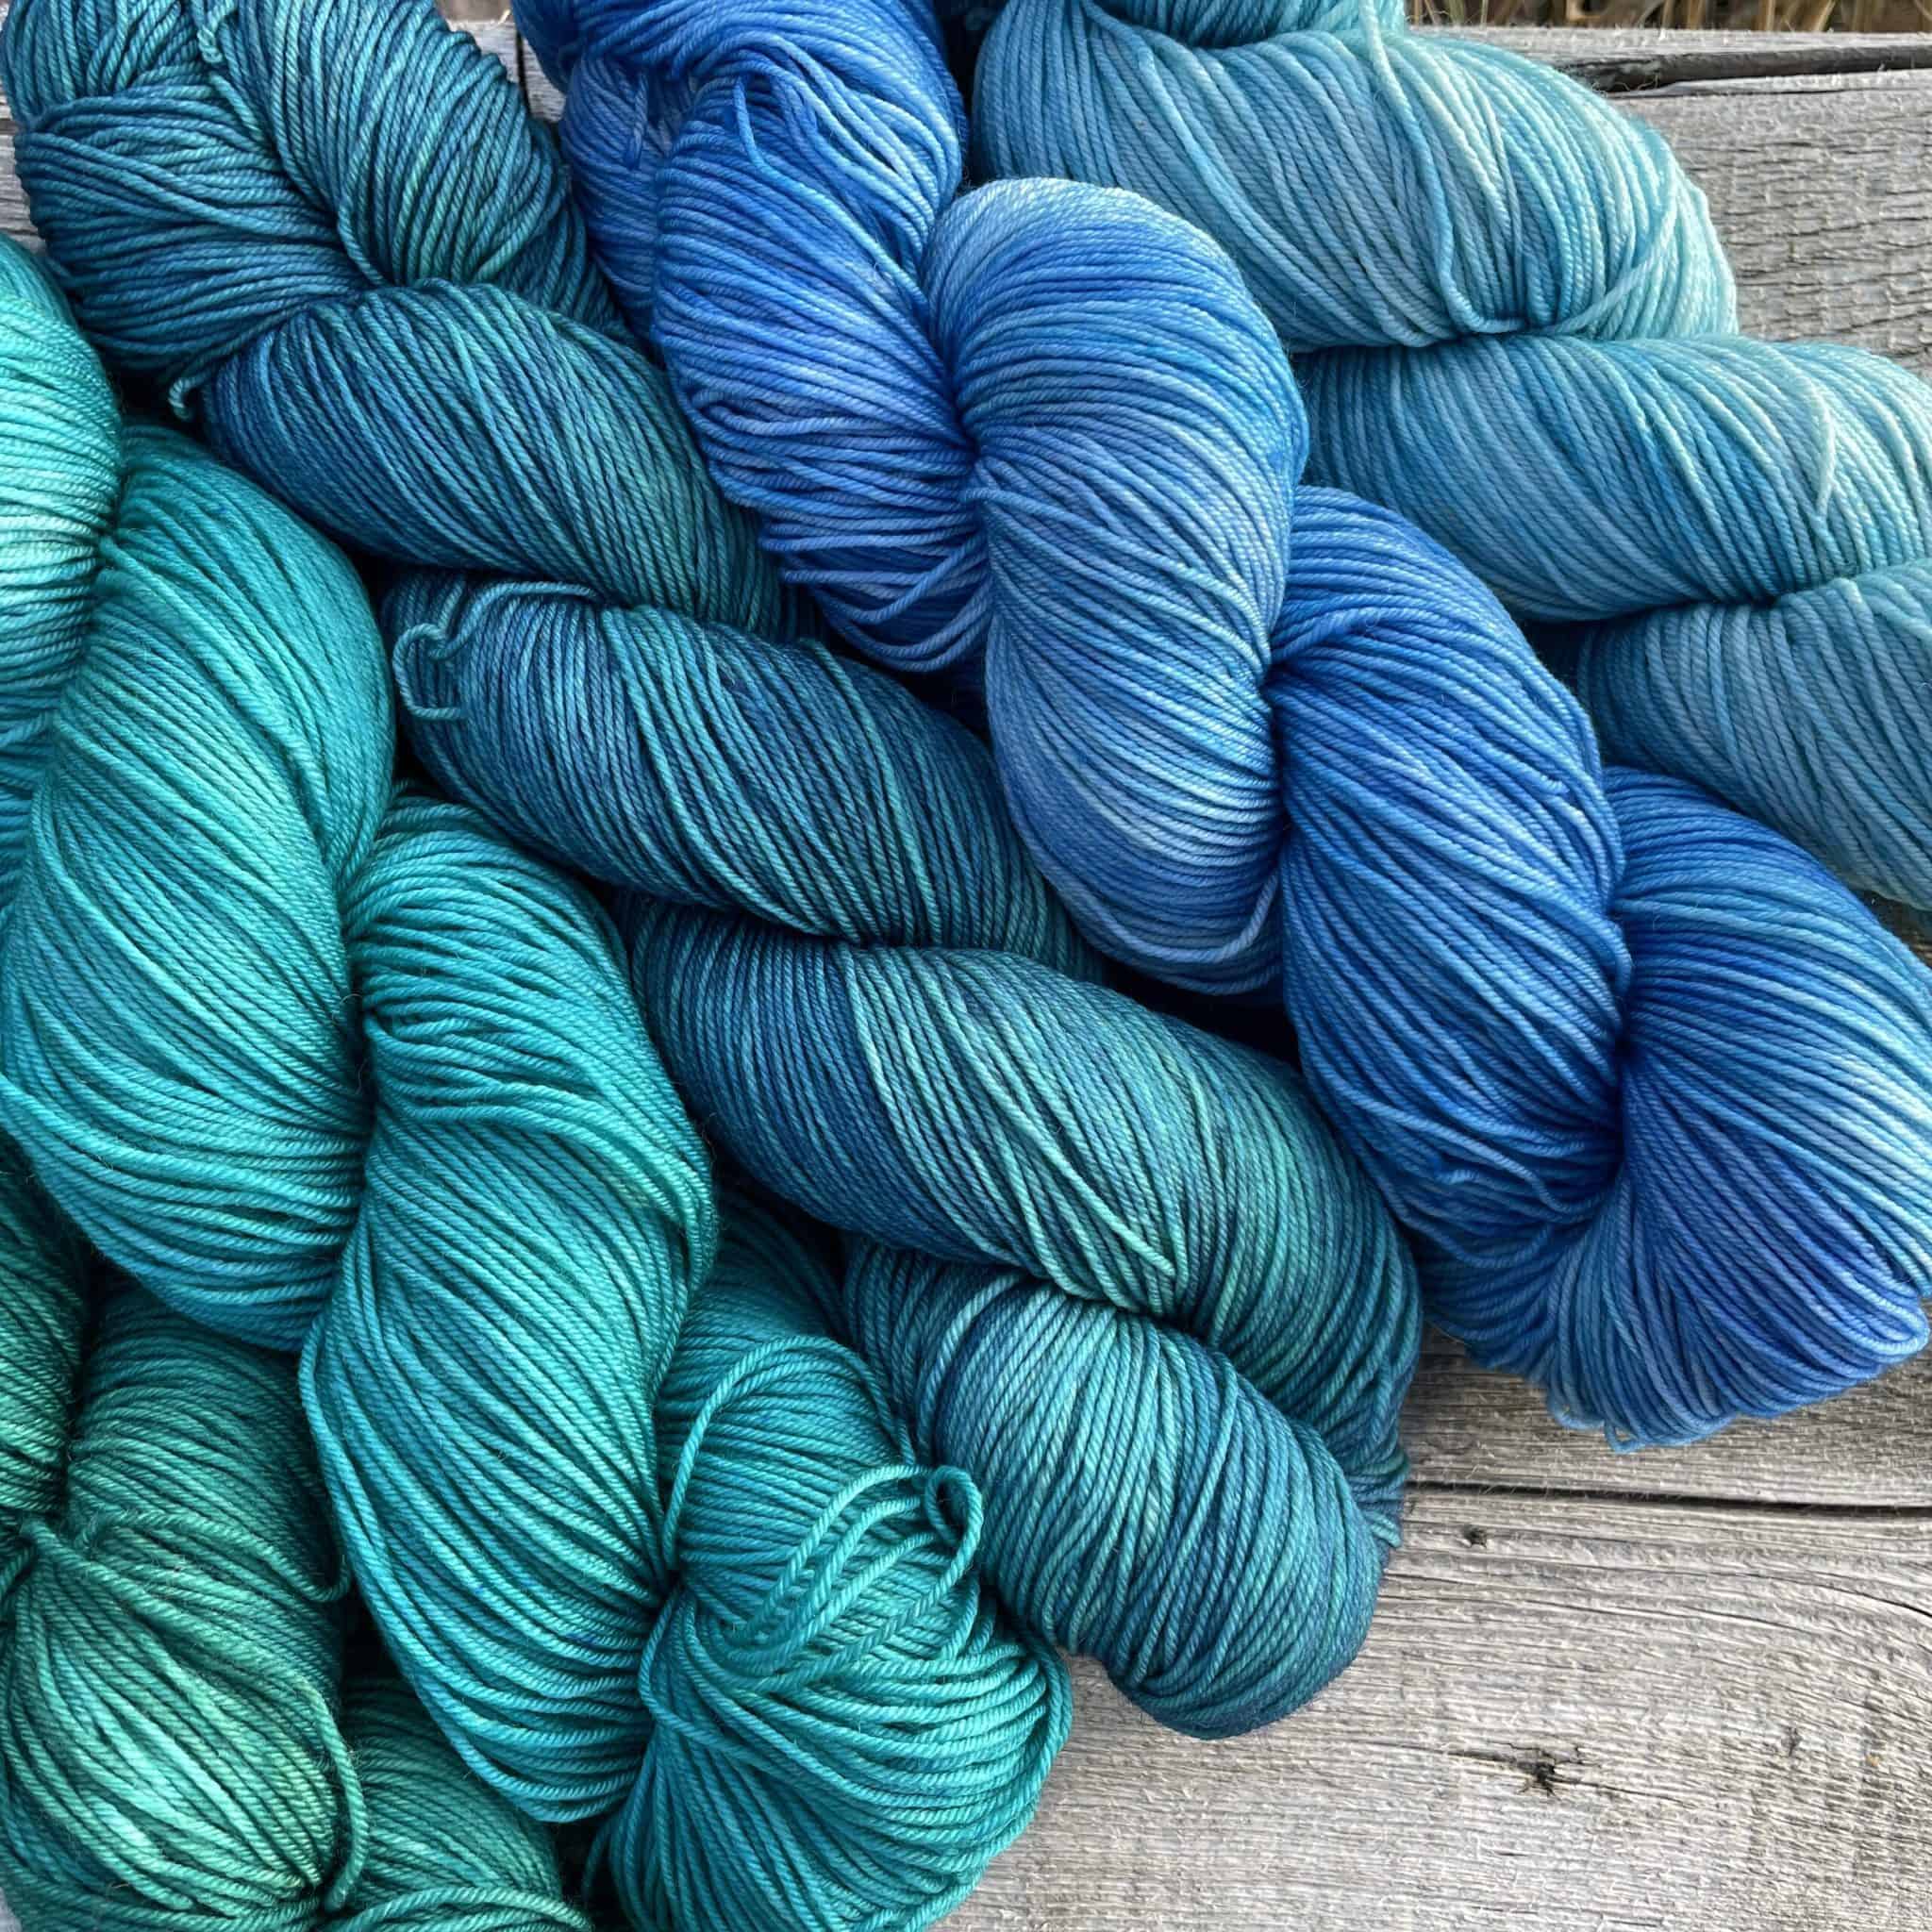 A set of hand-dyed yarn in a blue gradient.